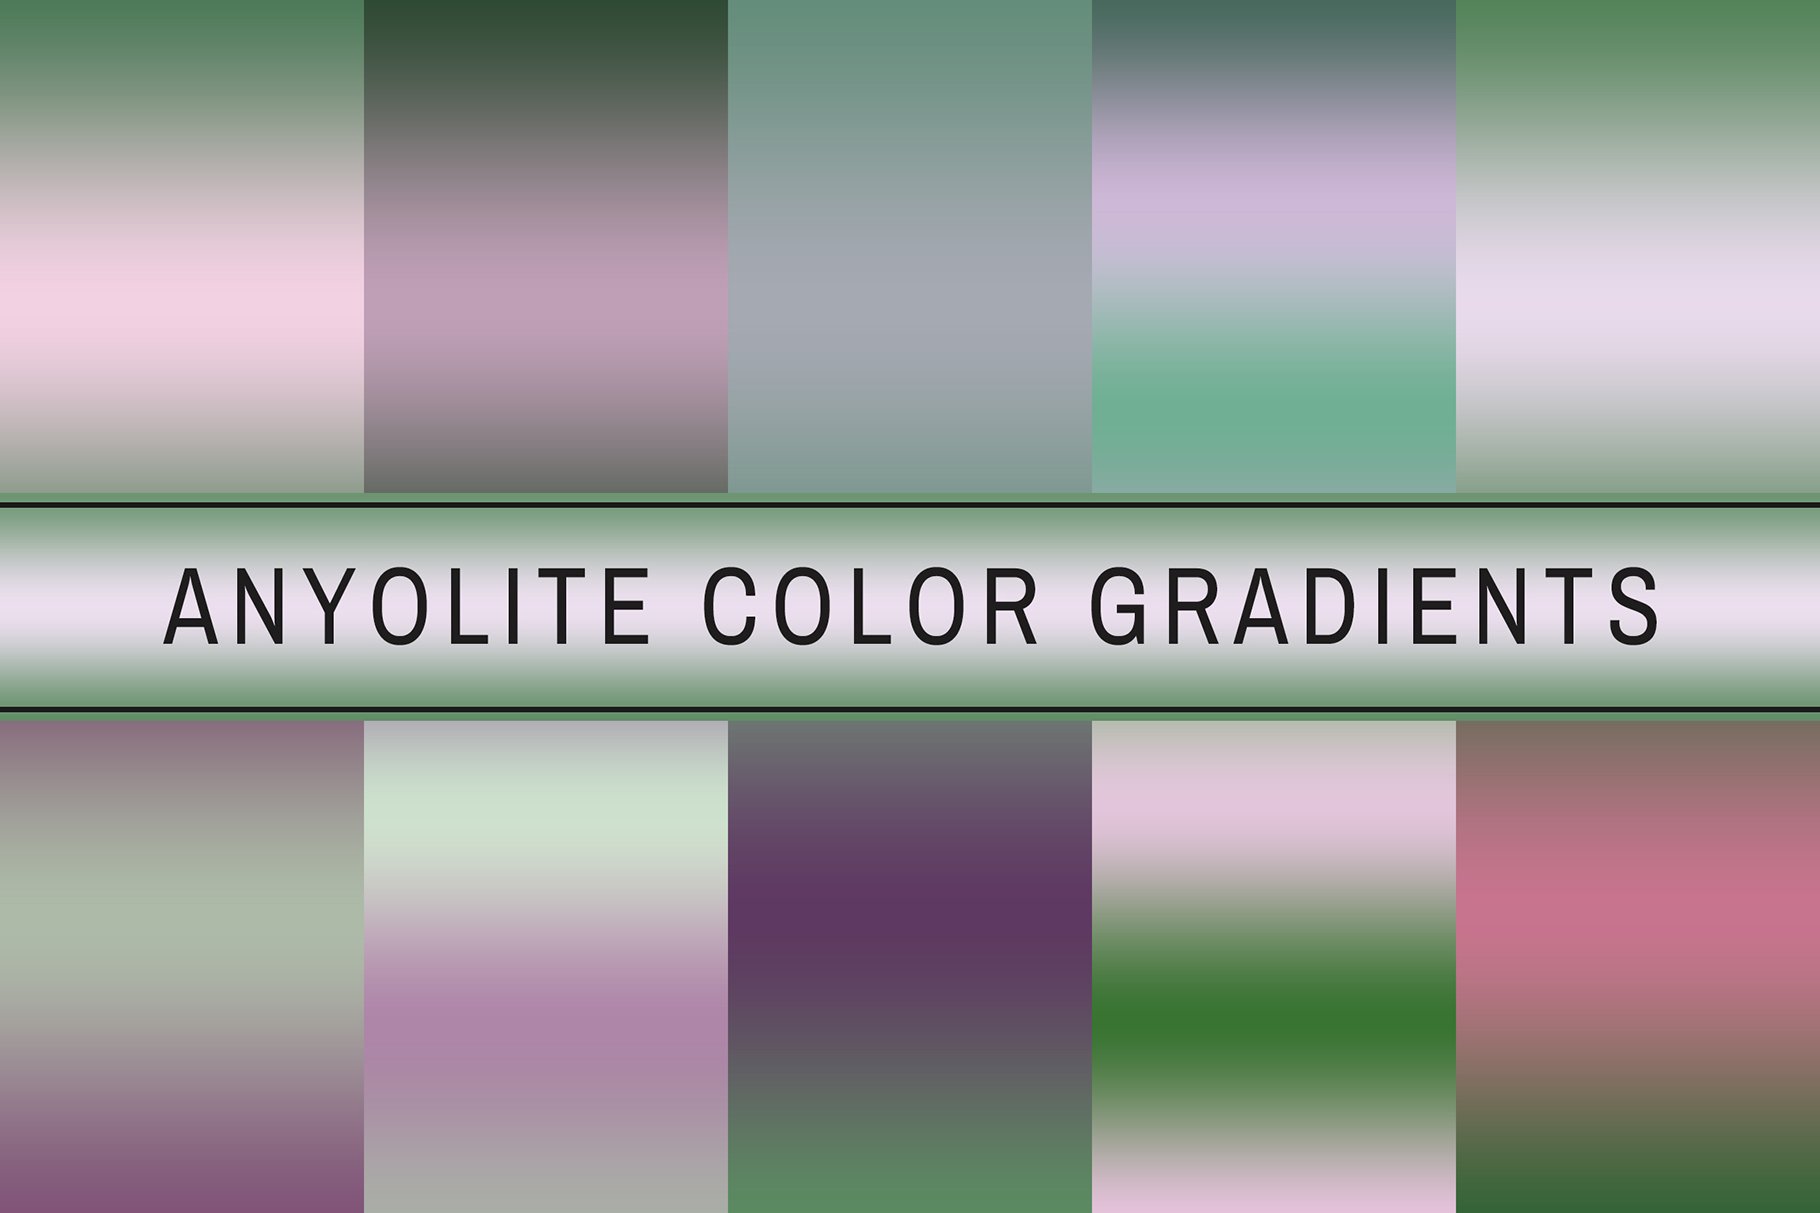 Anyolite Color Gradientscover image.